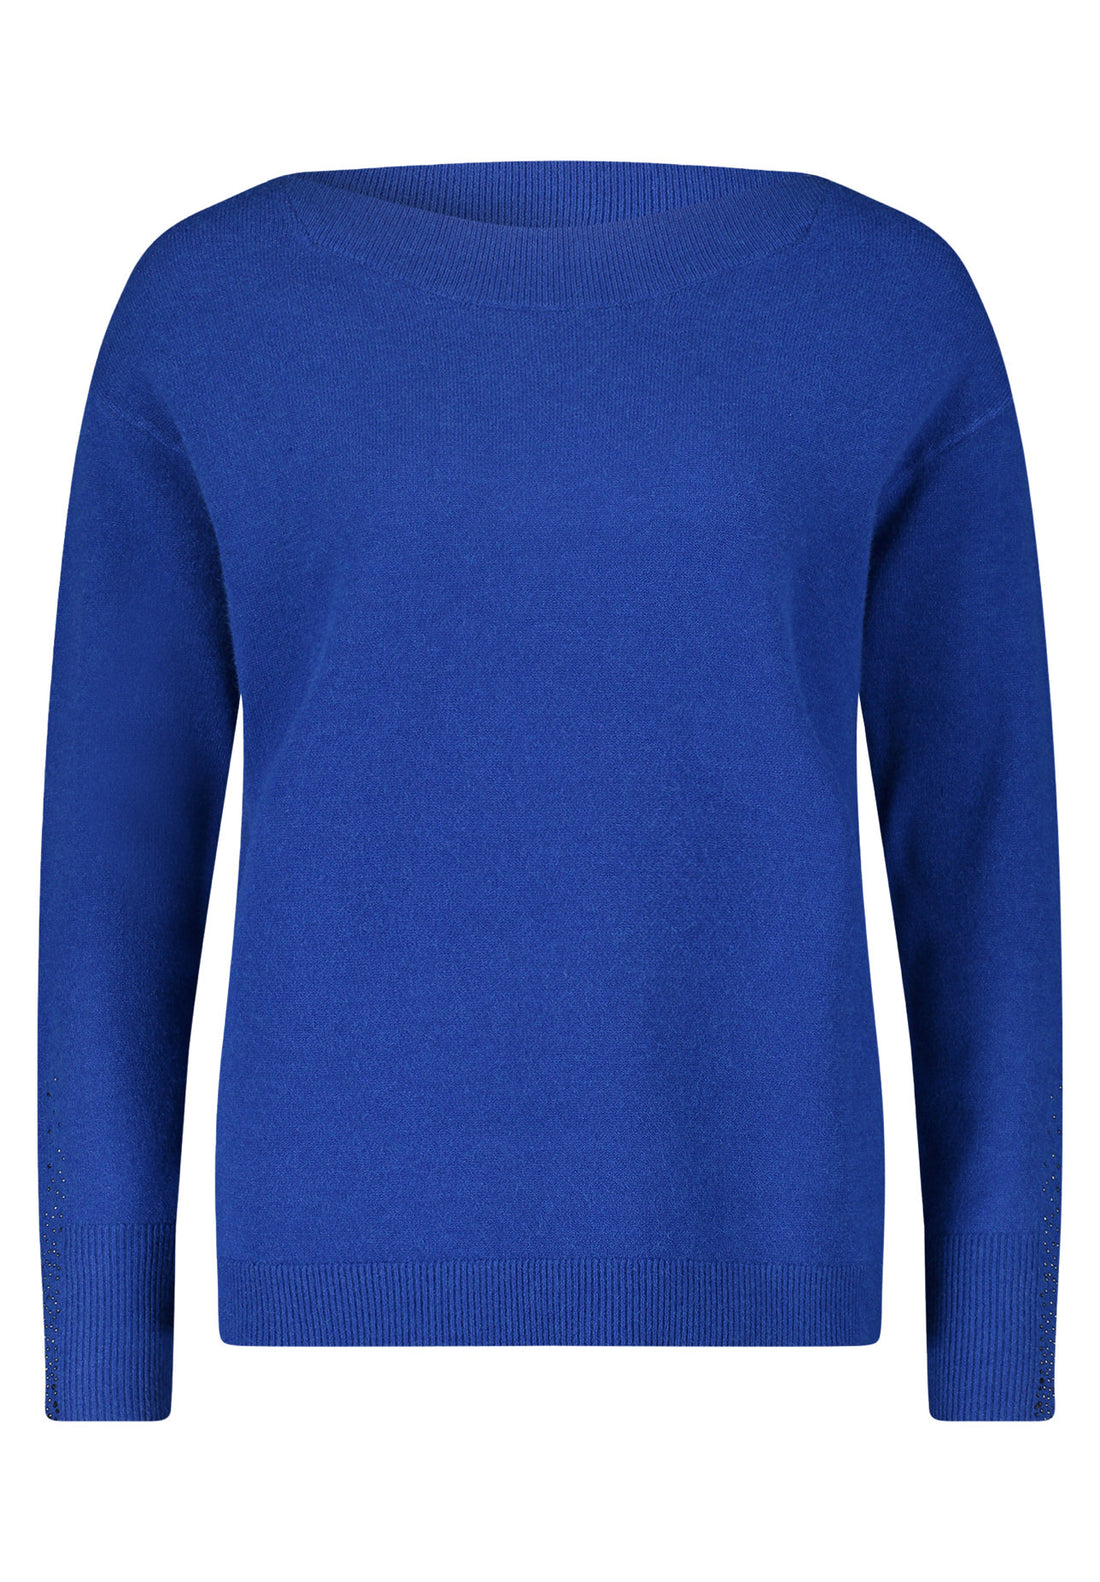 Long Sleeve Pullover With Mockneck_5003-1026_8329_01